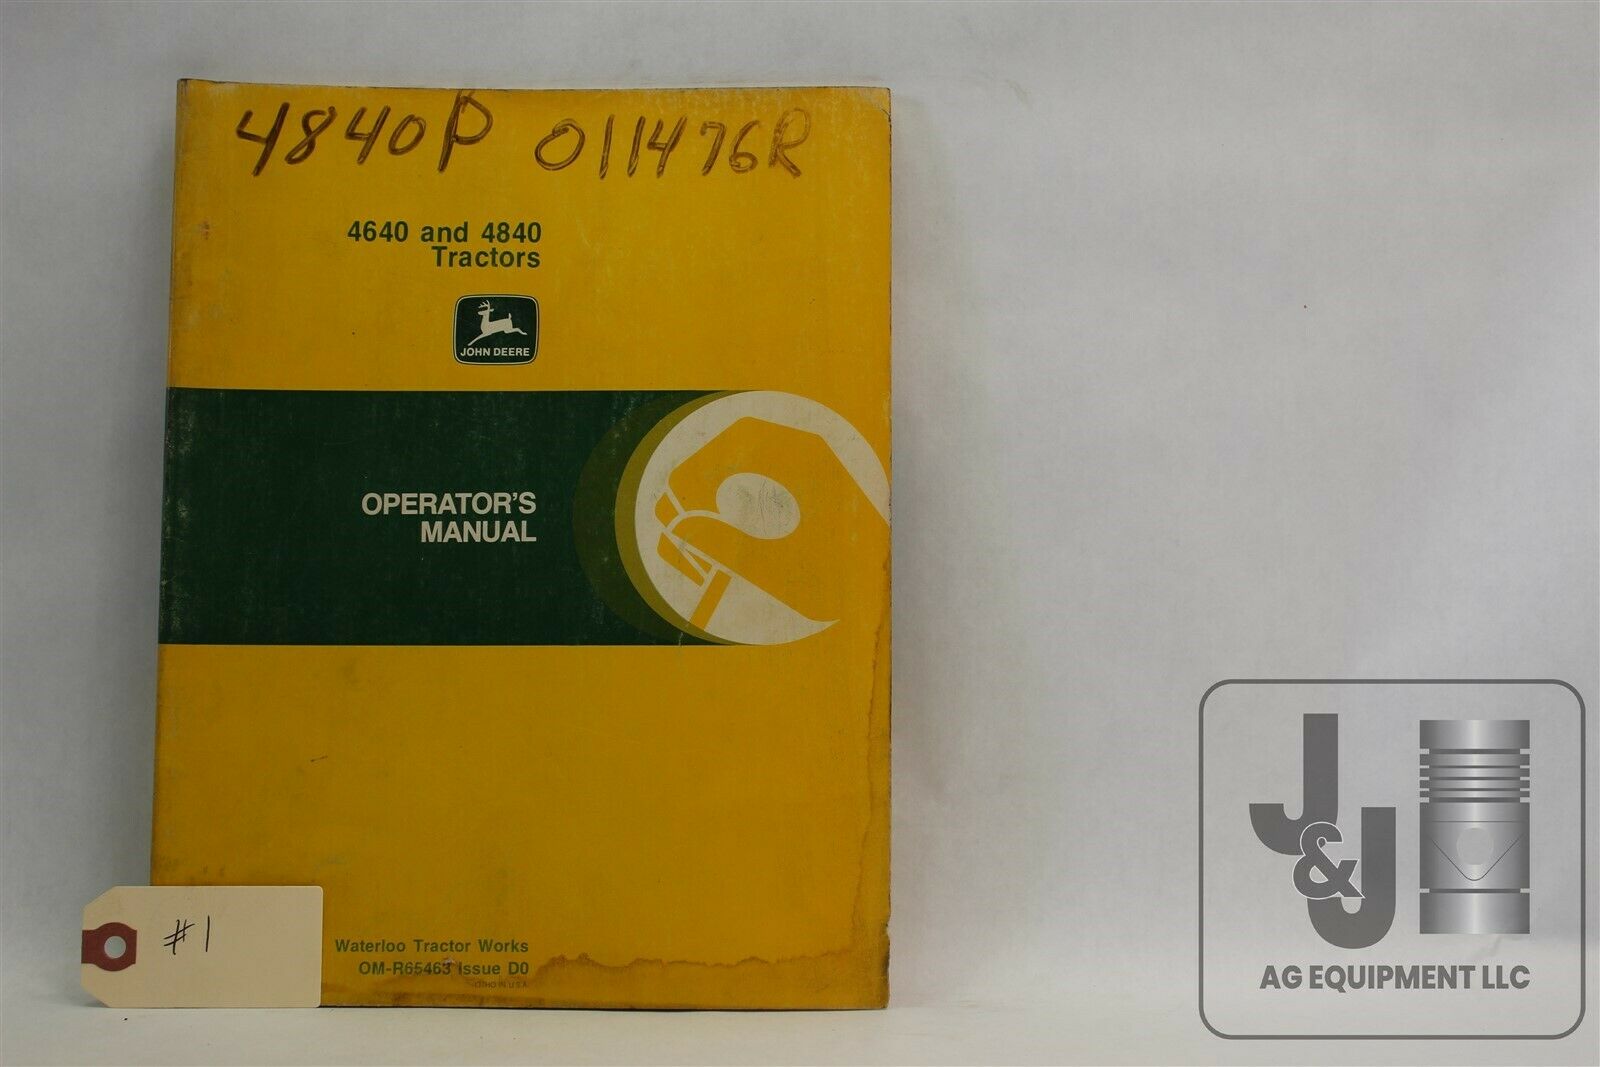 JOHN DEERE 4640 AND 4840 #1 TRACTOR OPERATOR'S MANUAL OM-R65463 ISSUE D0